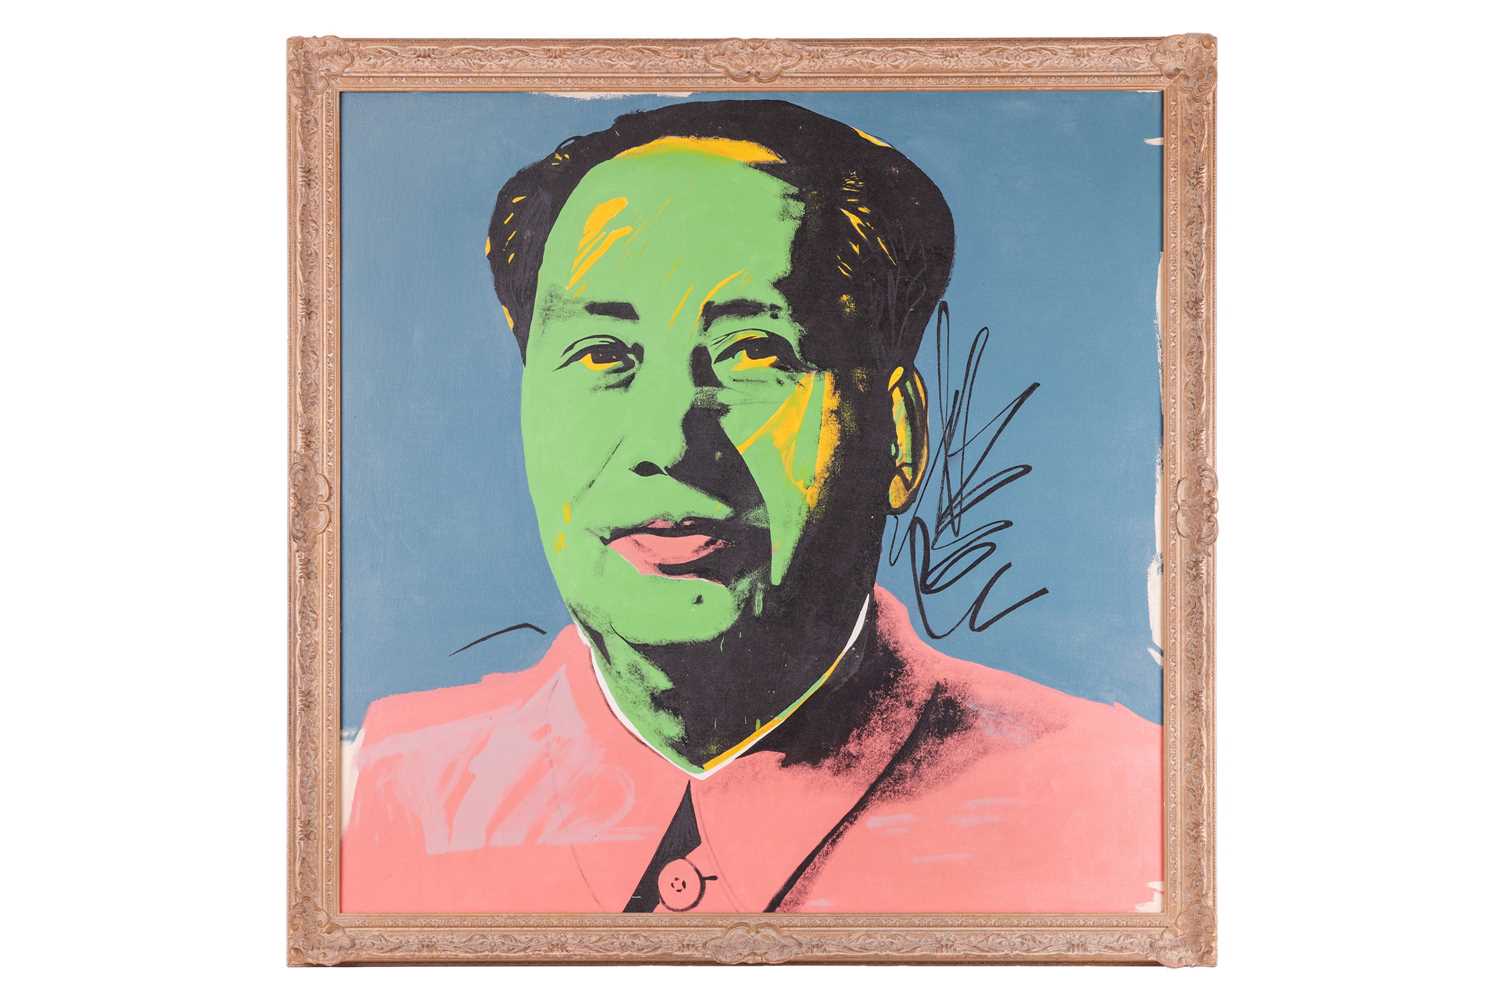 After Andy Warhol (American, 1928 - 1987), Mao 1972 (Green), unsigned, oil on canvas, 100 x 100 cm, 